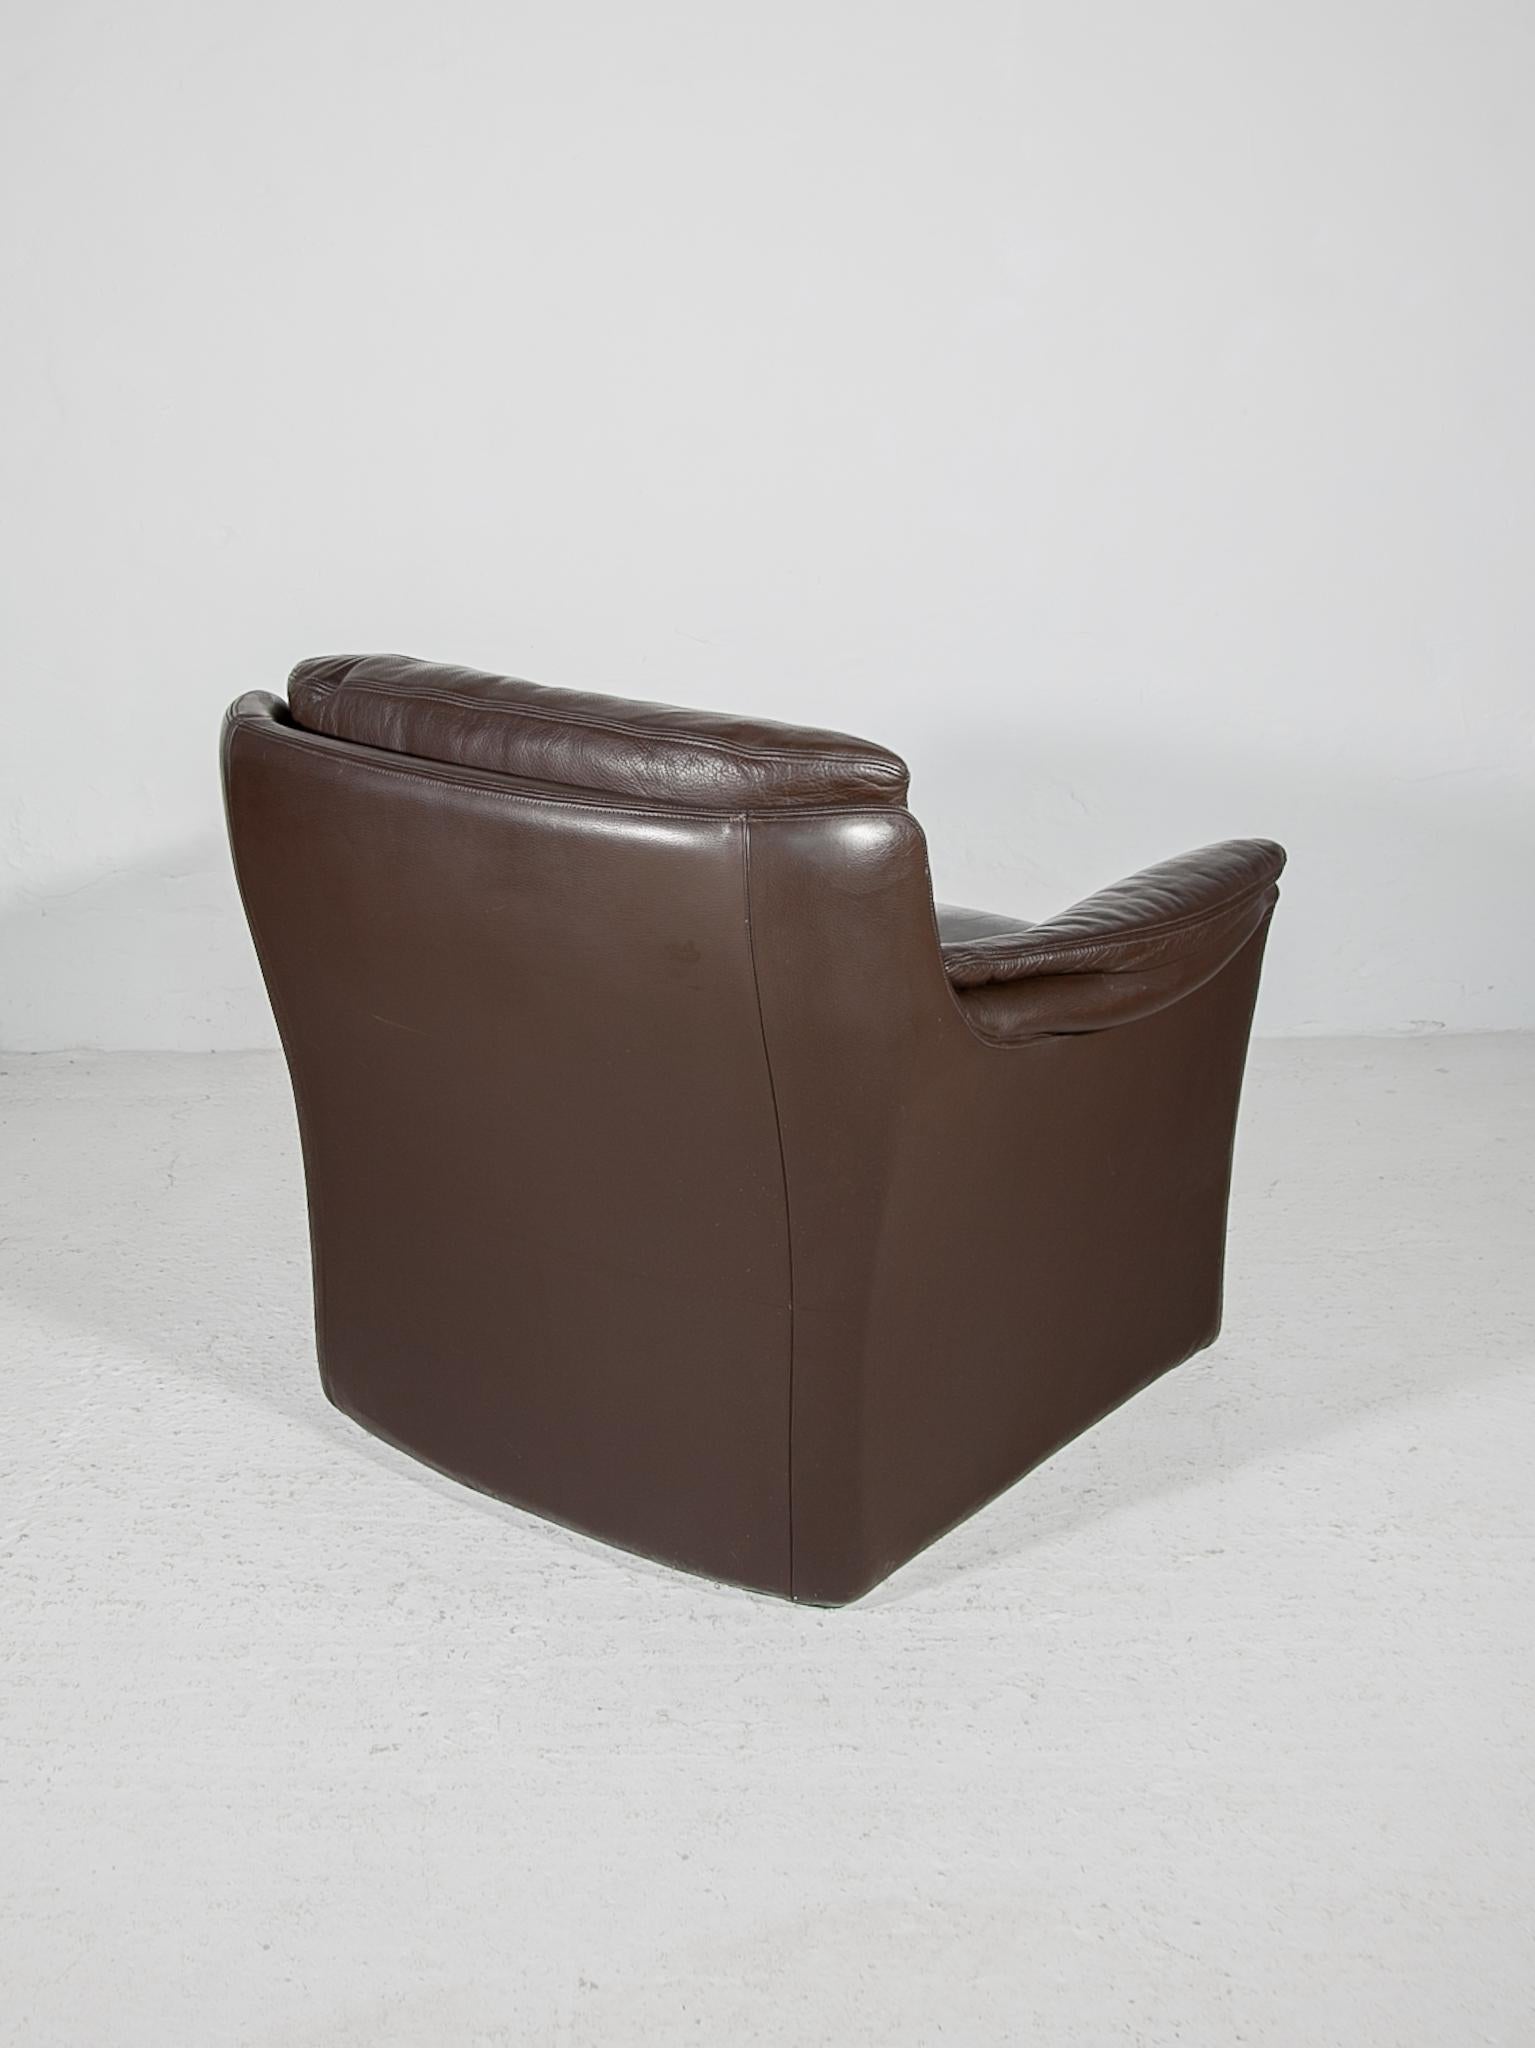 Belgian  Durlet Lounge Chair, Buffolo Brown Leather, 1970s For Sale